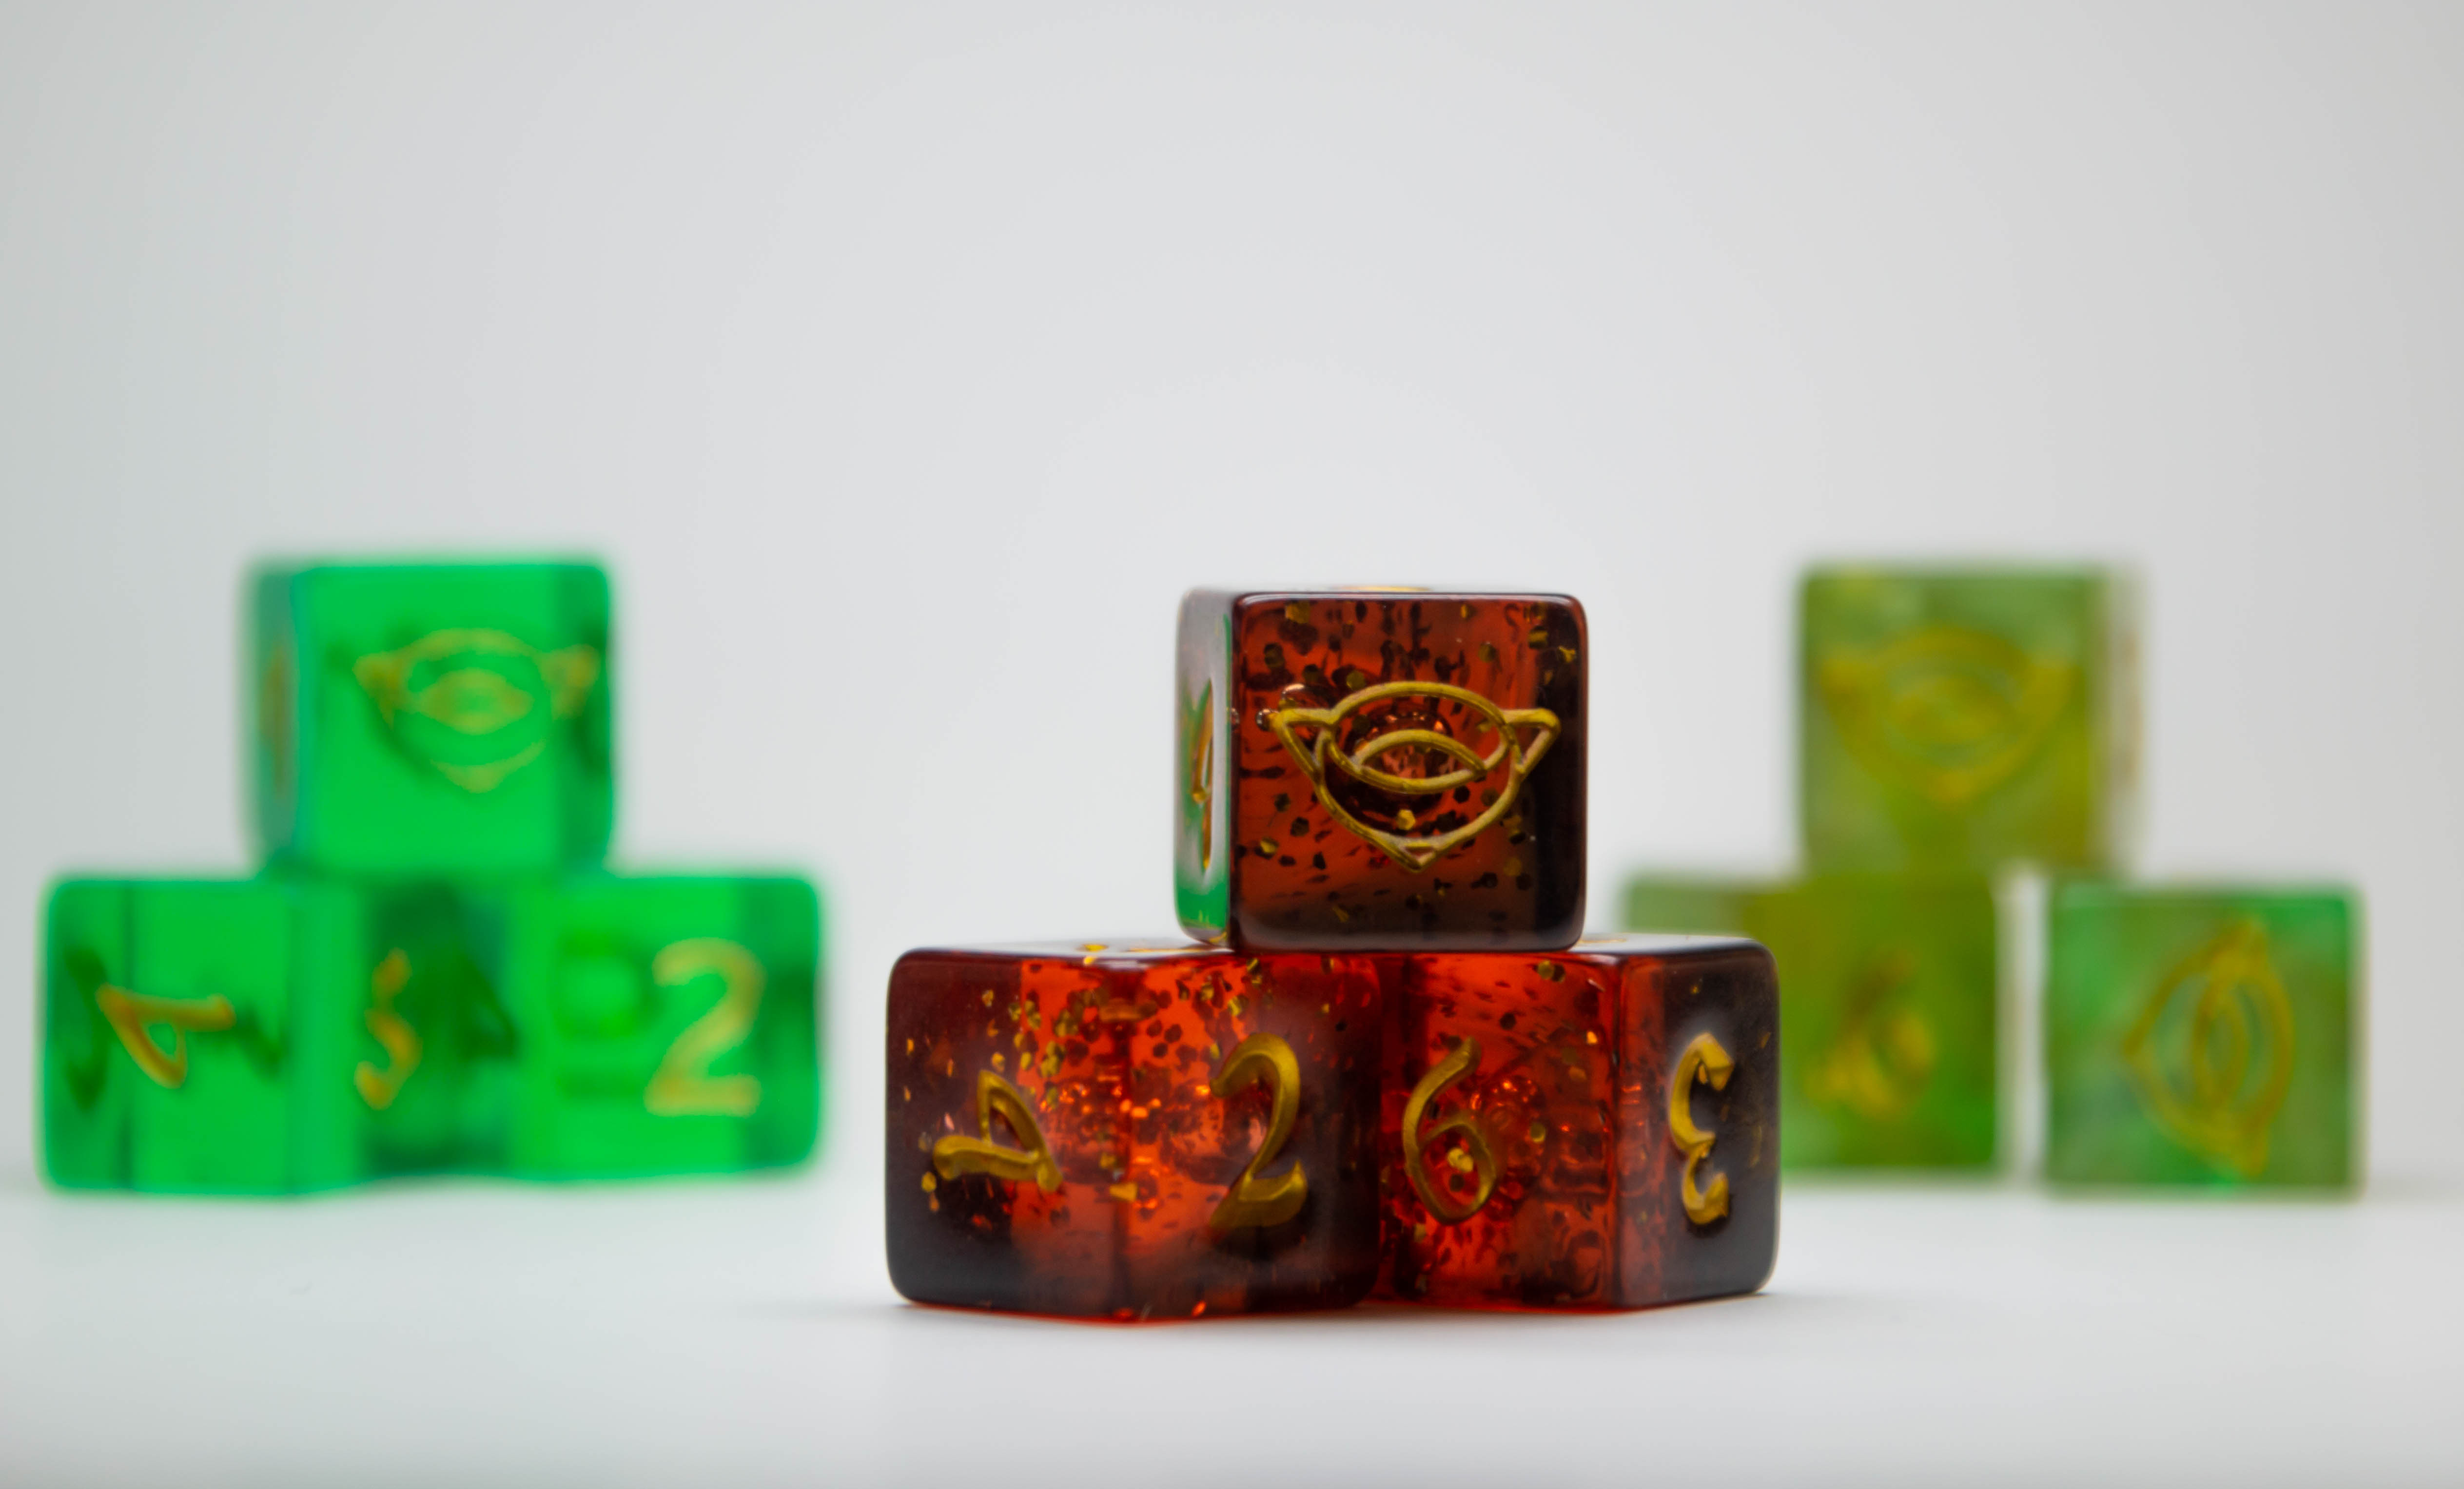 Magic Celebration Event dice in three colors side-by-side